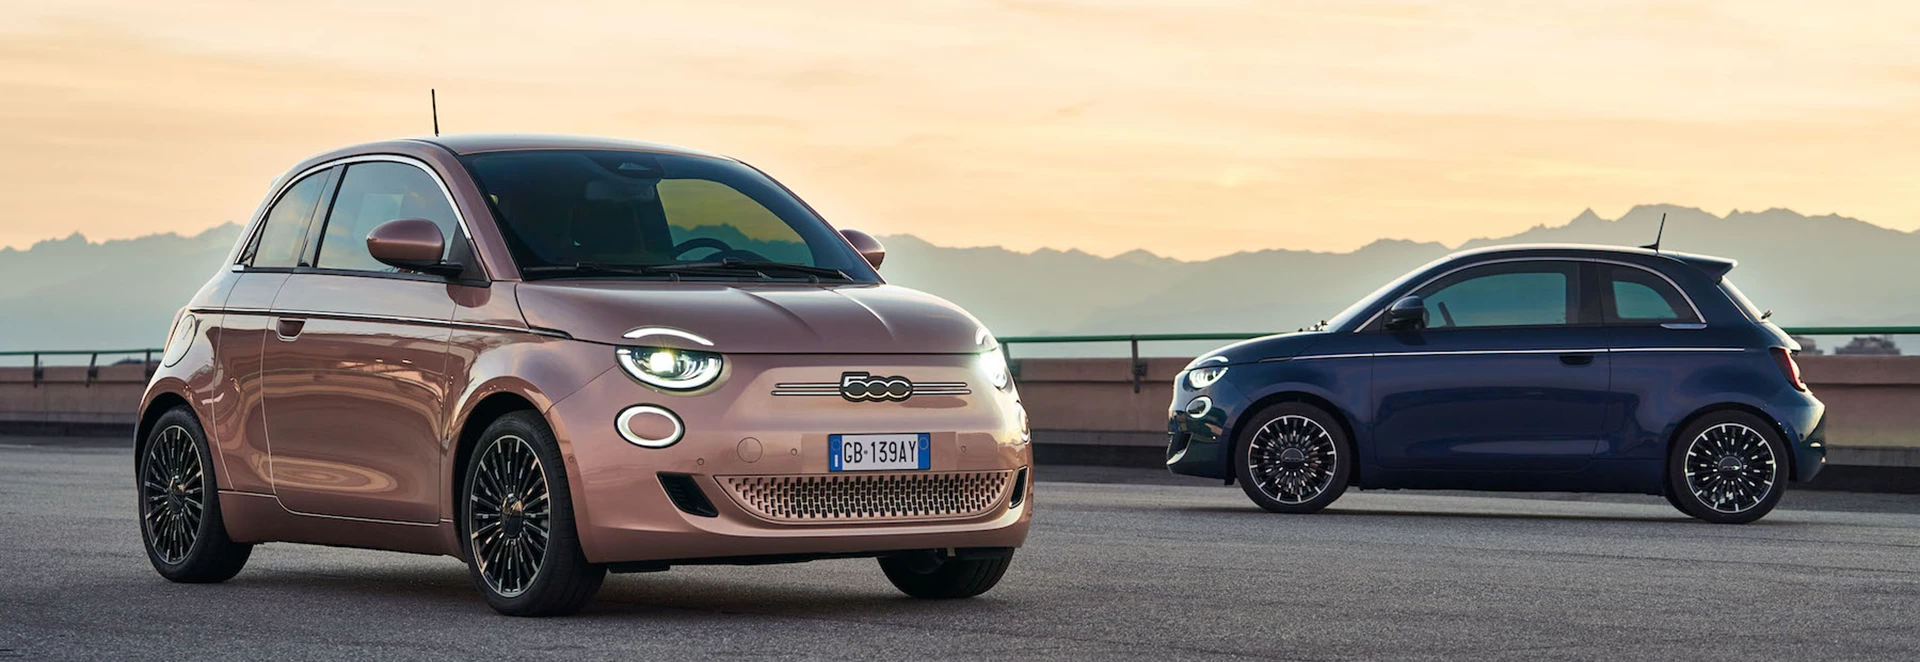 5 things you need to know about the electric Fiat 500 